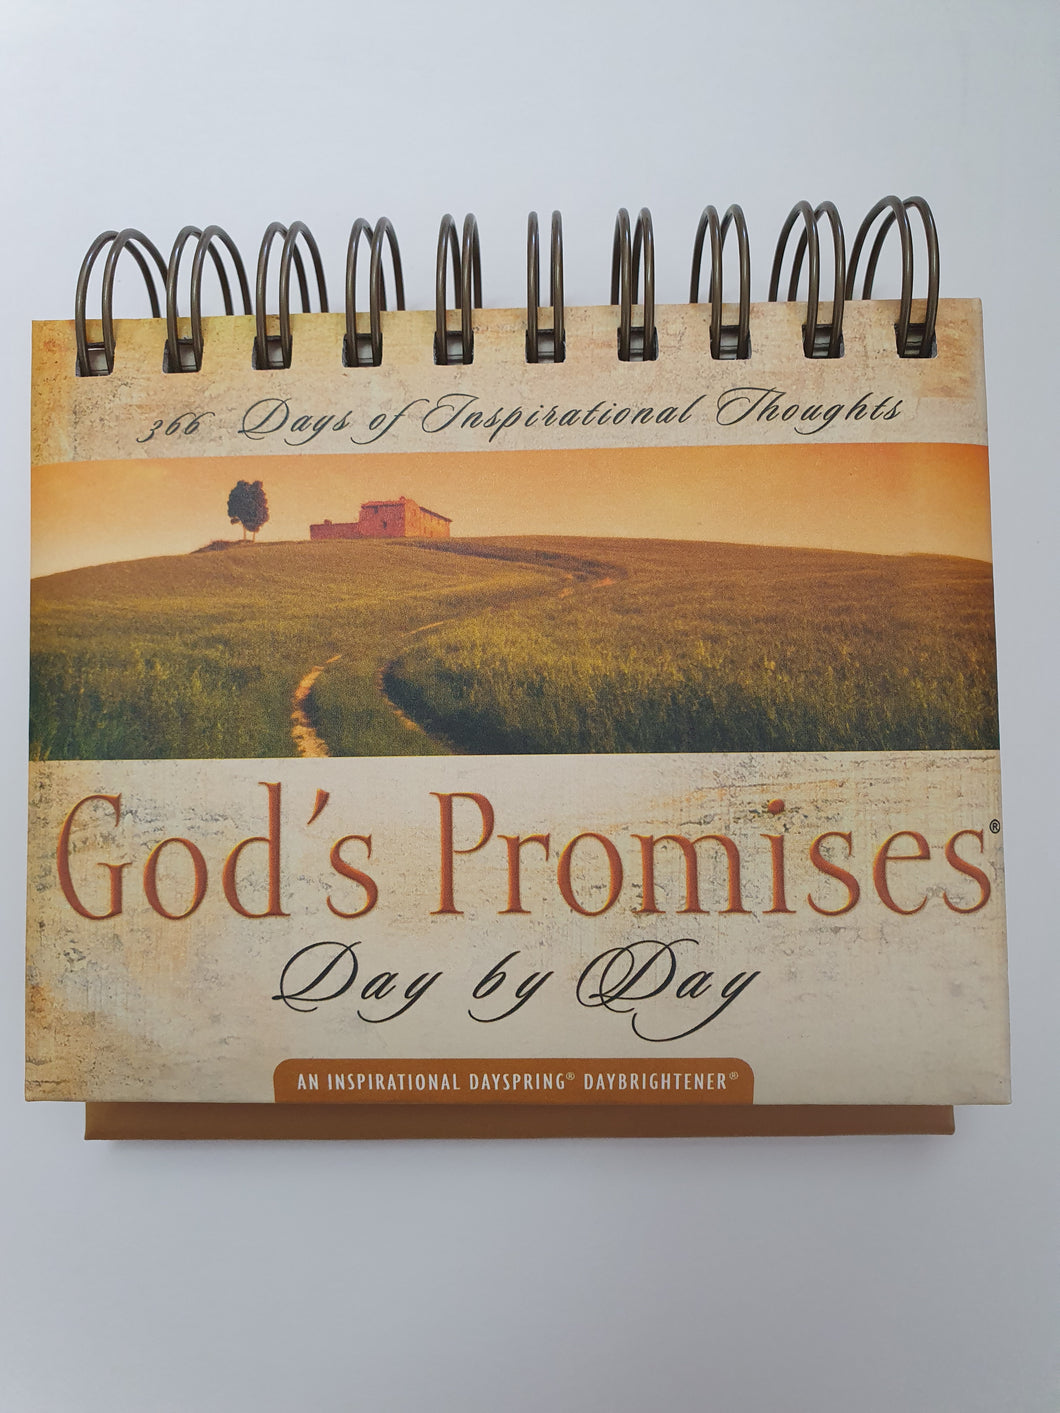 Daybrightener: God's Promises Day by Day